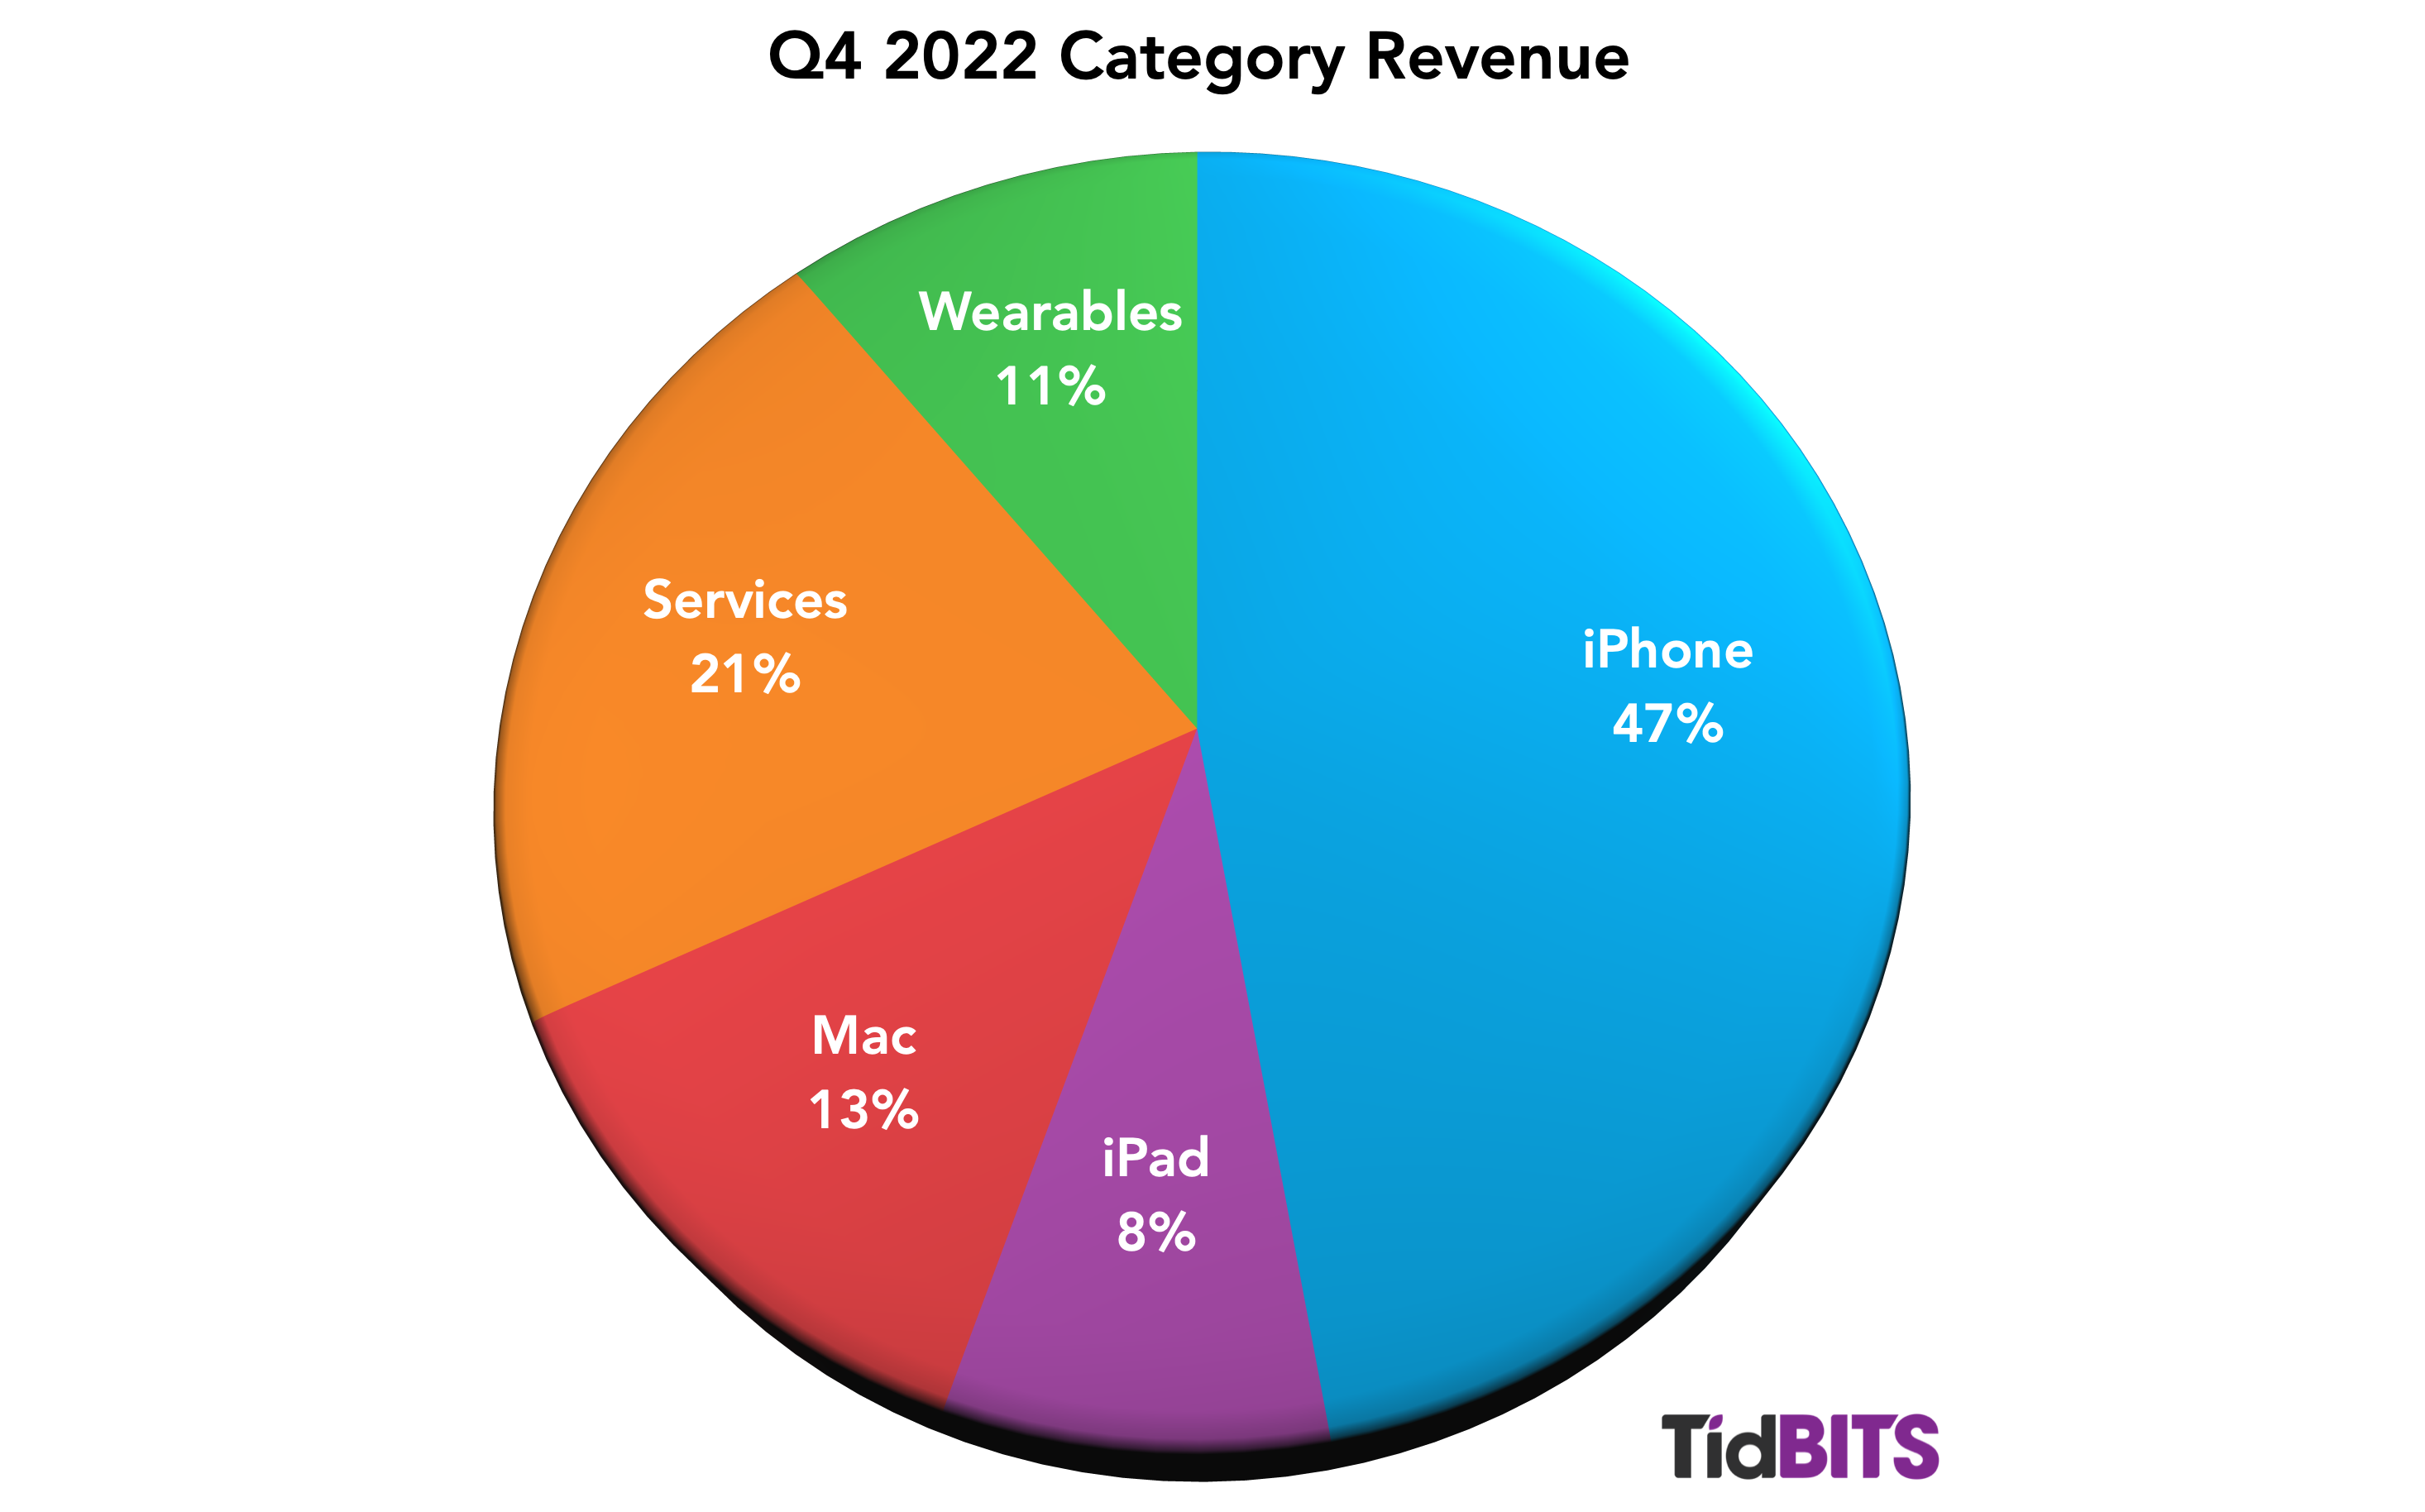 iPhone 47%, Services 21%, Mac 13%, Wearables 11%, iPad 8%